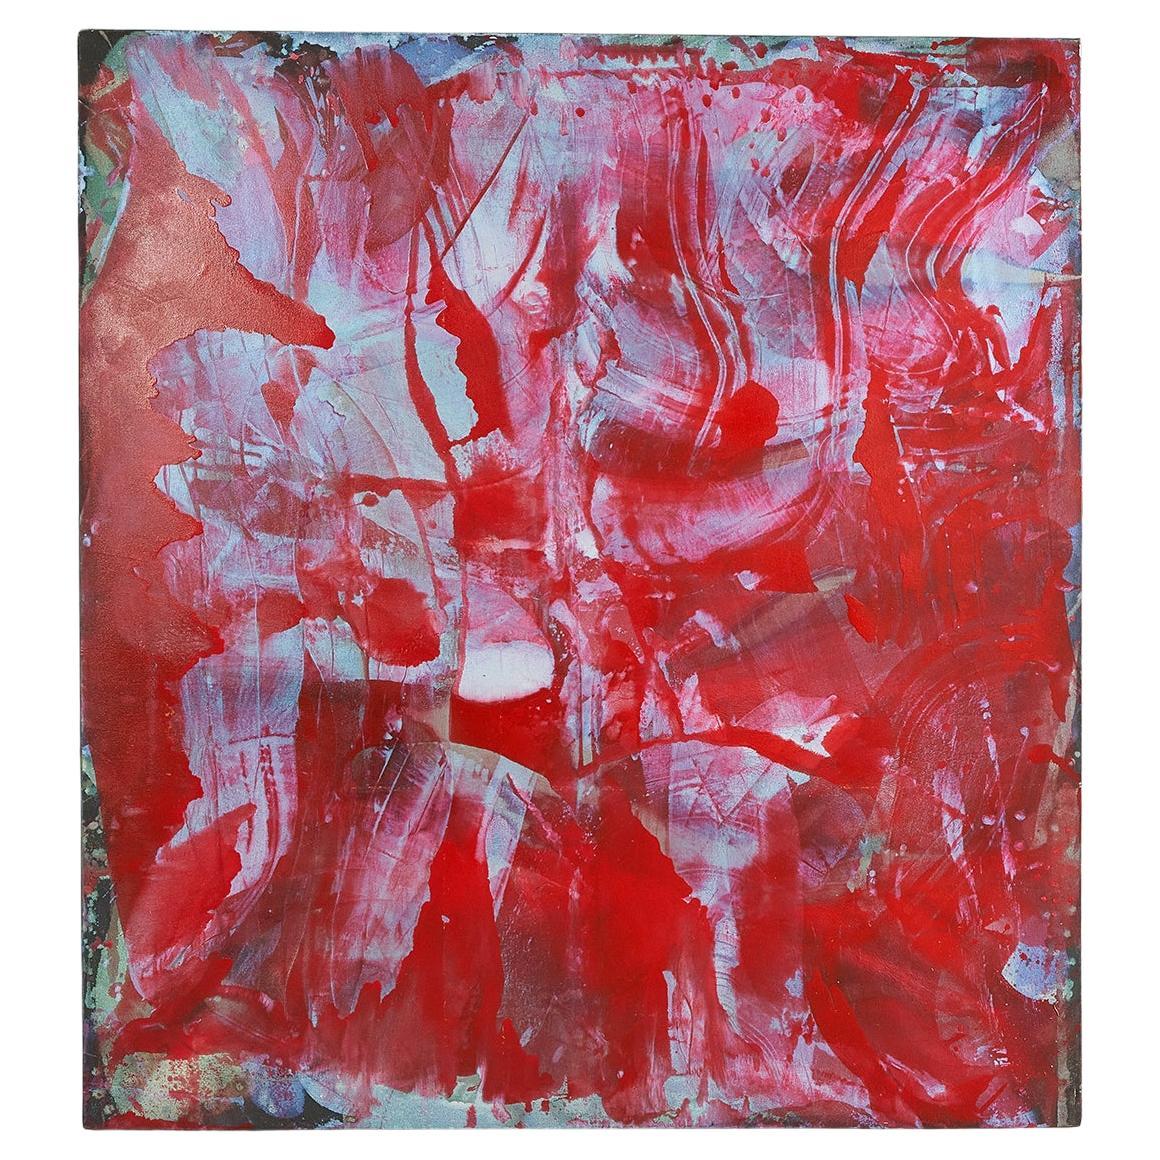 Large Red and Blue Abstract Painting "Temporary Ephedrine" by John Link